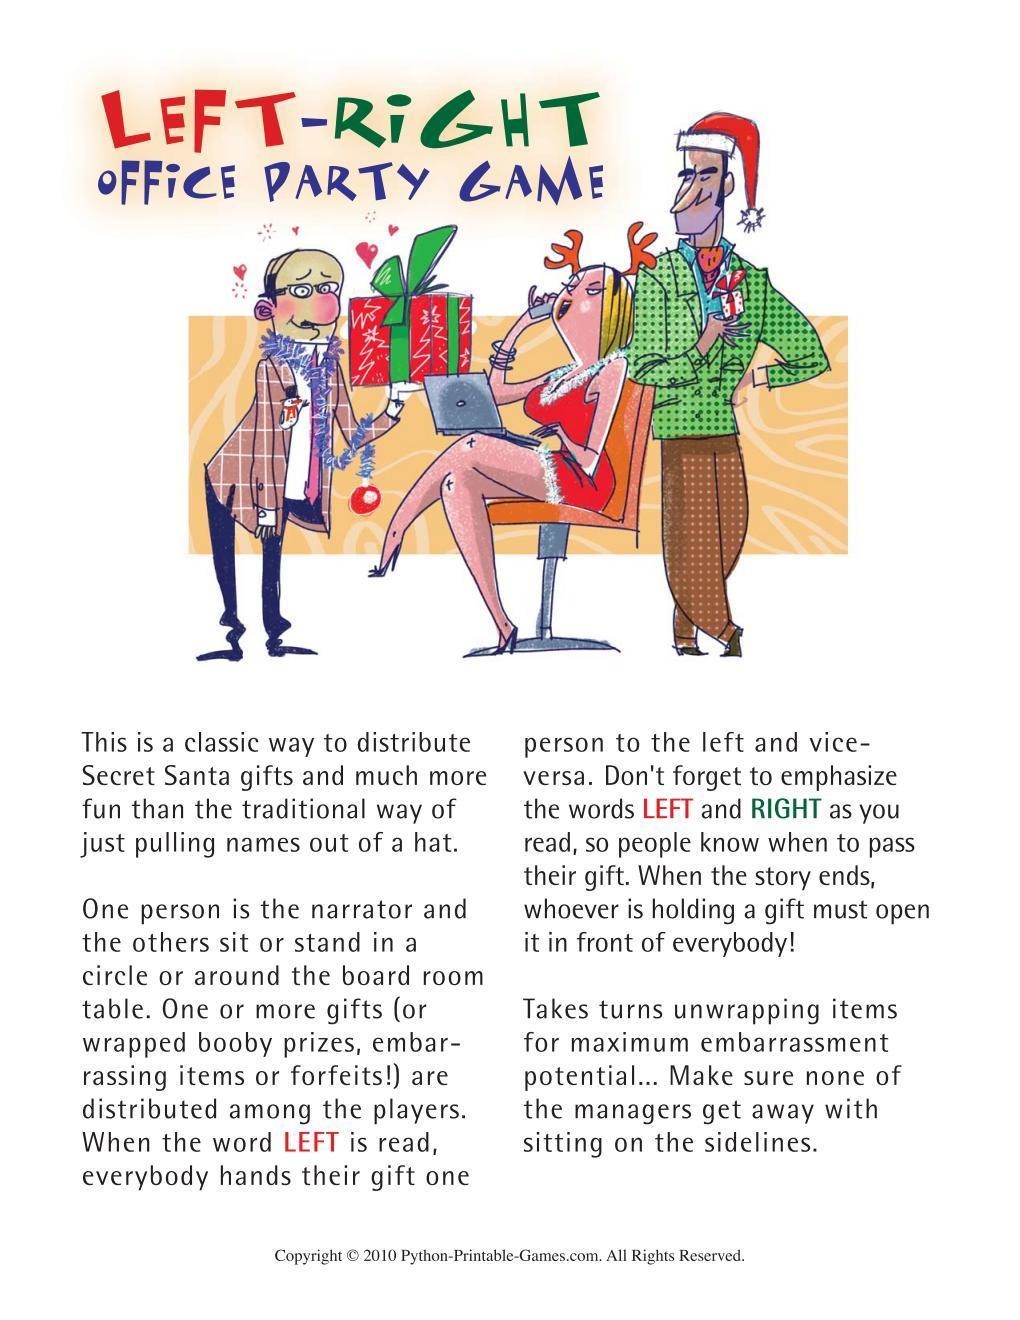 games-for-the-office-office-christmas-left-right-christmas-party